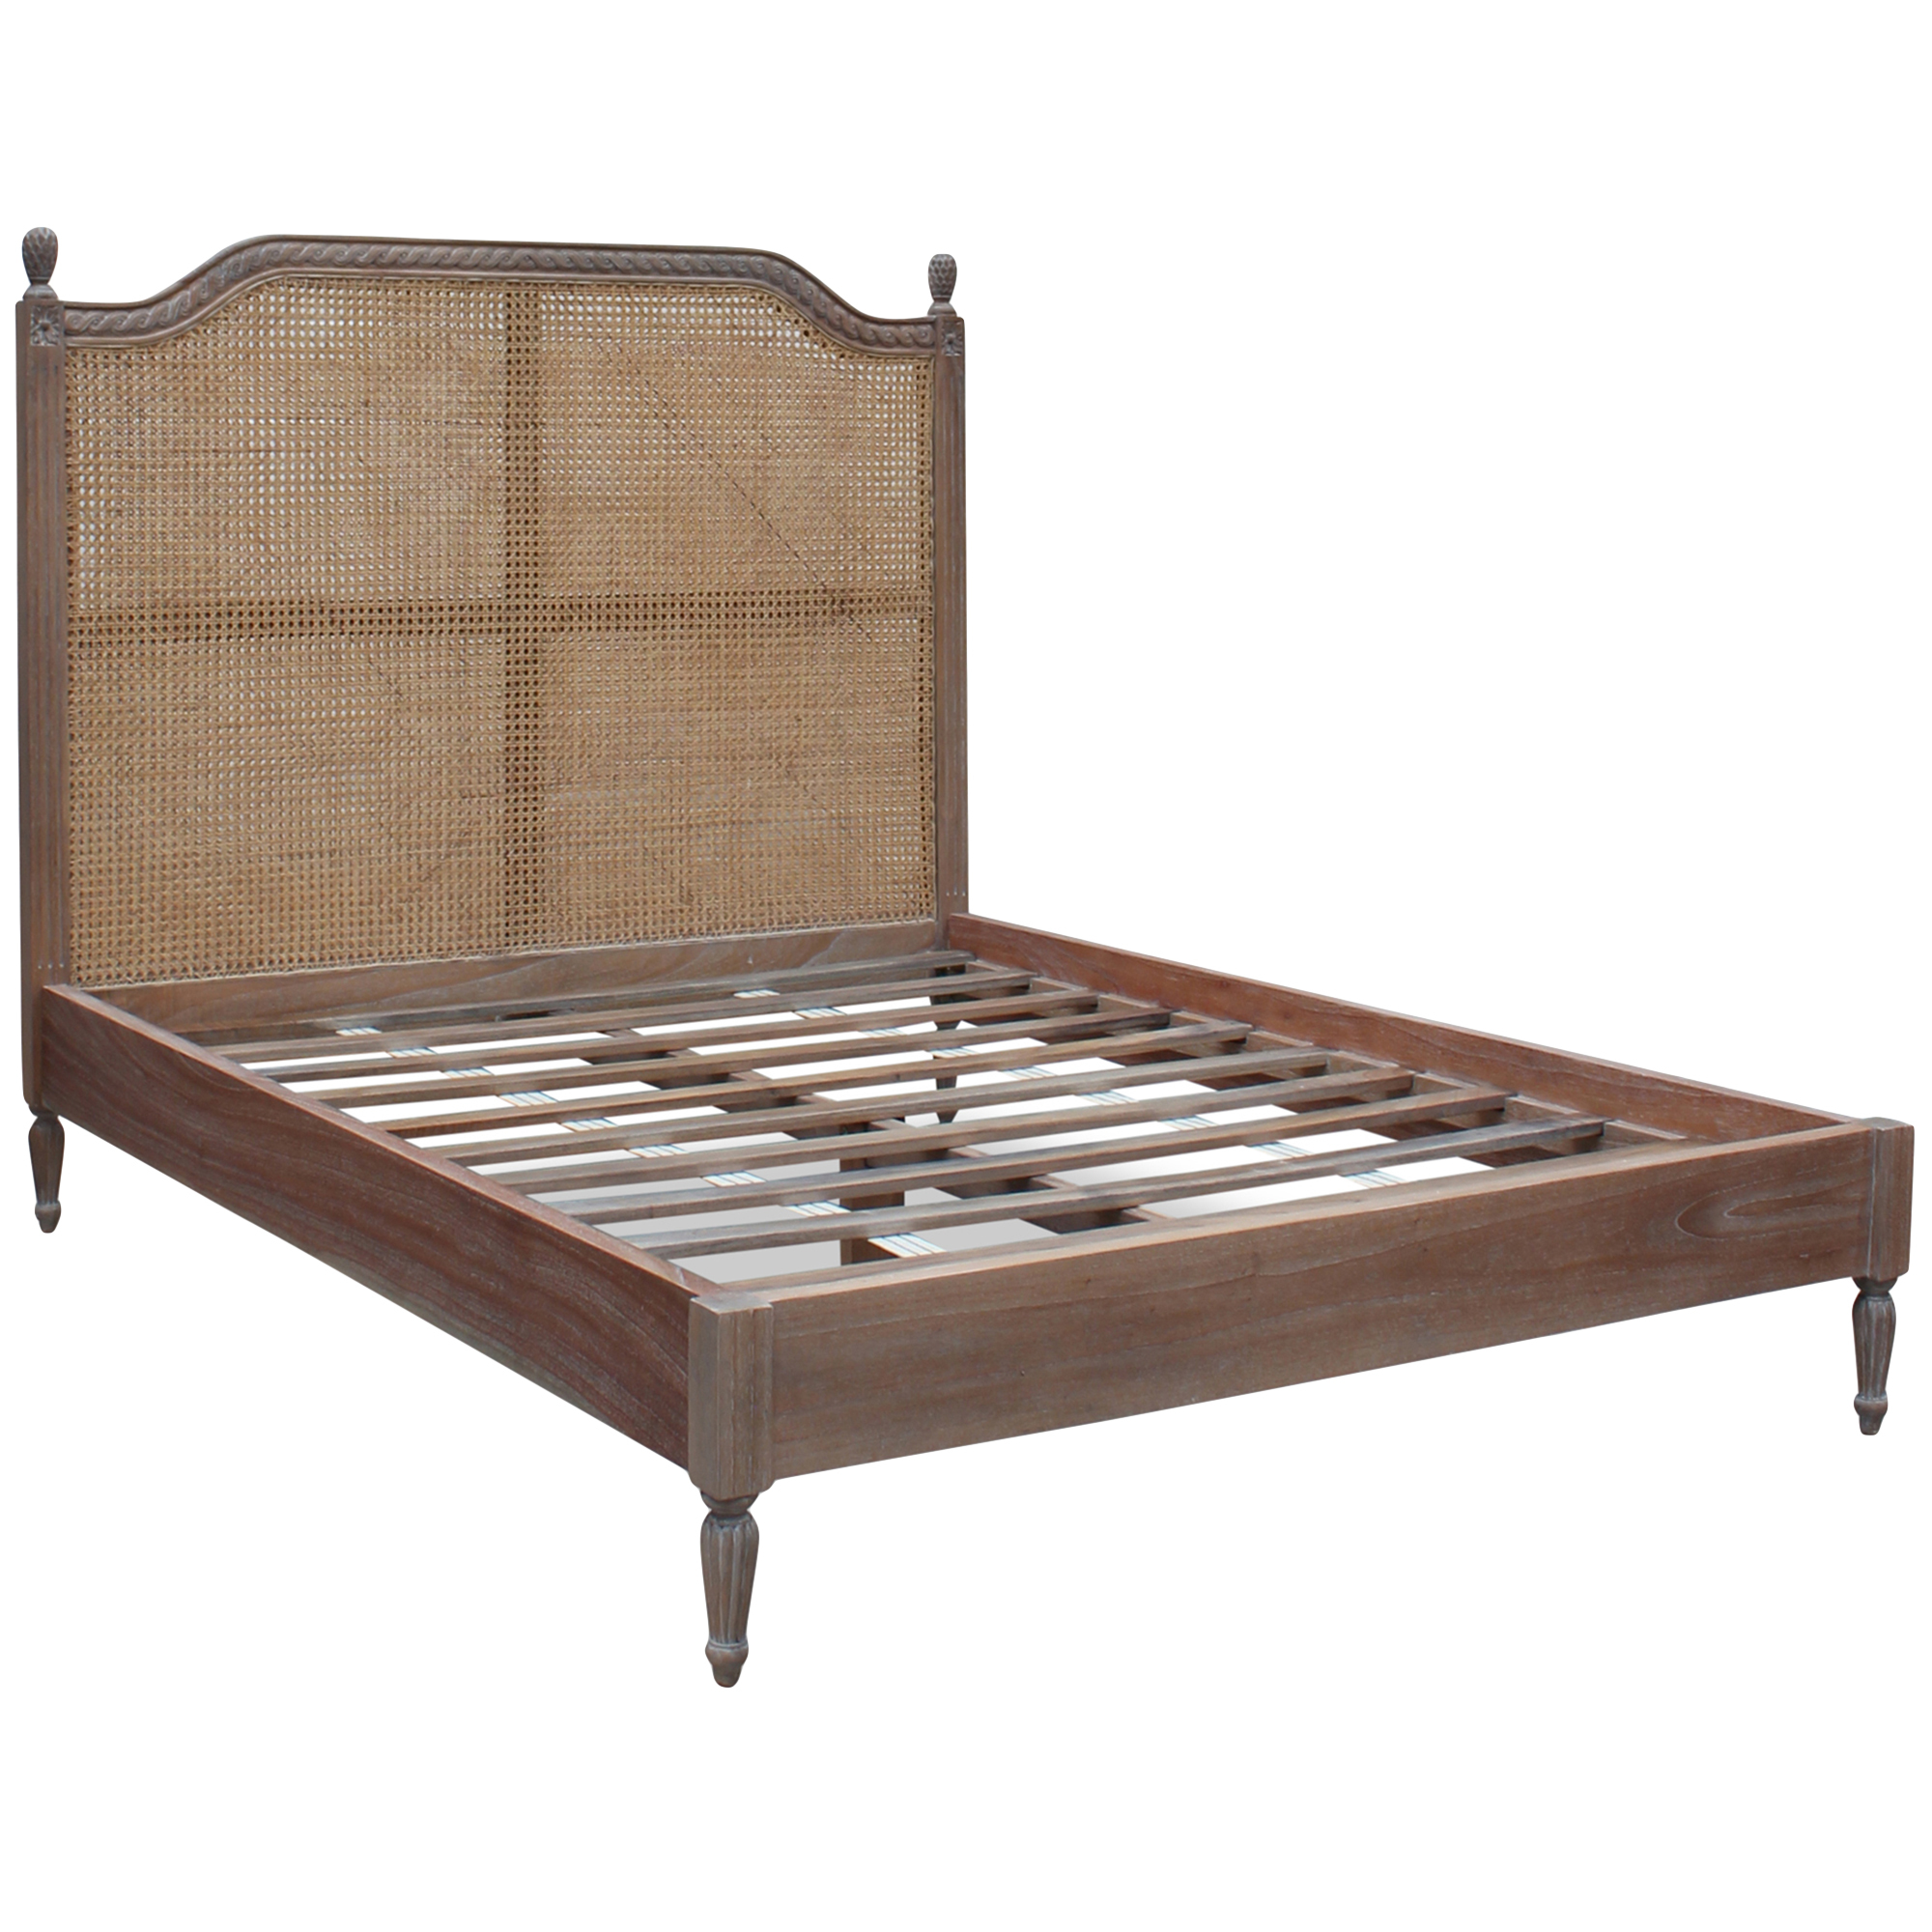 Carrington Furniture French Provincial, King Rattan Bed